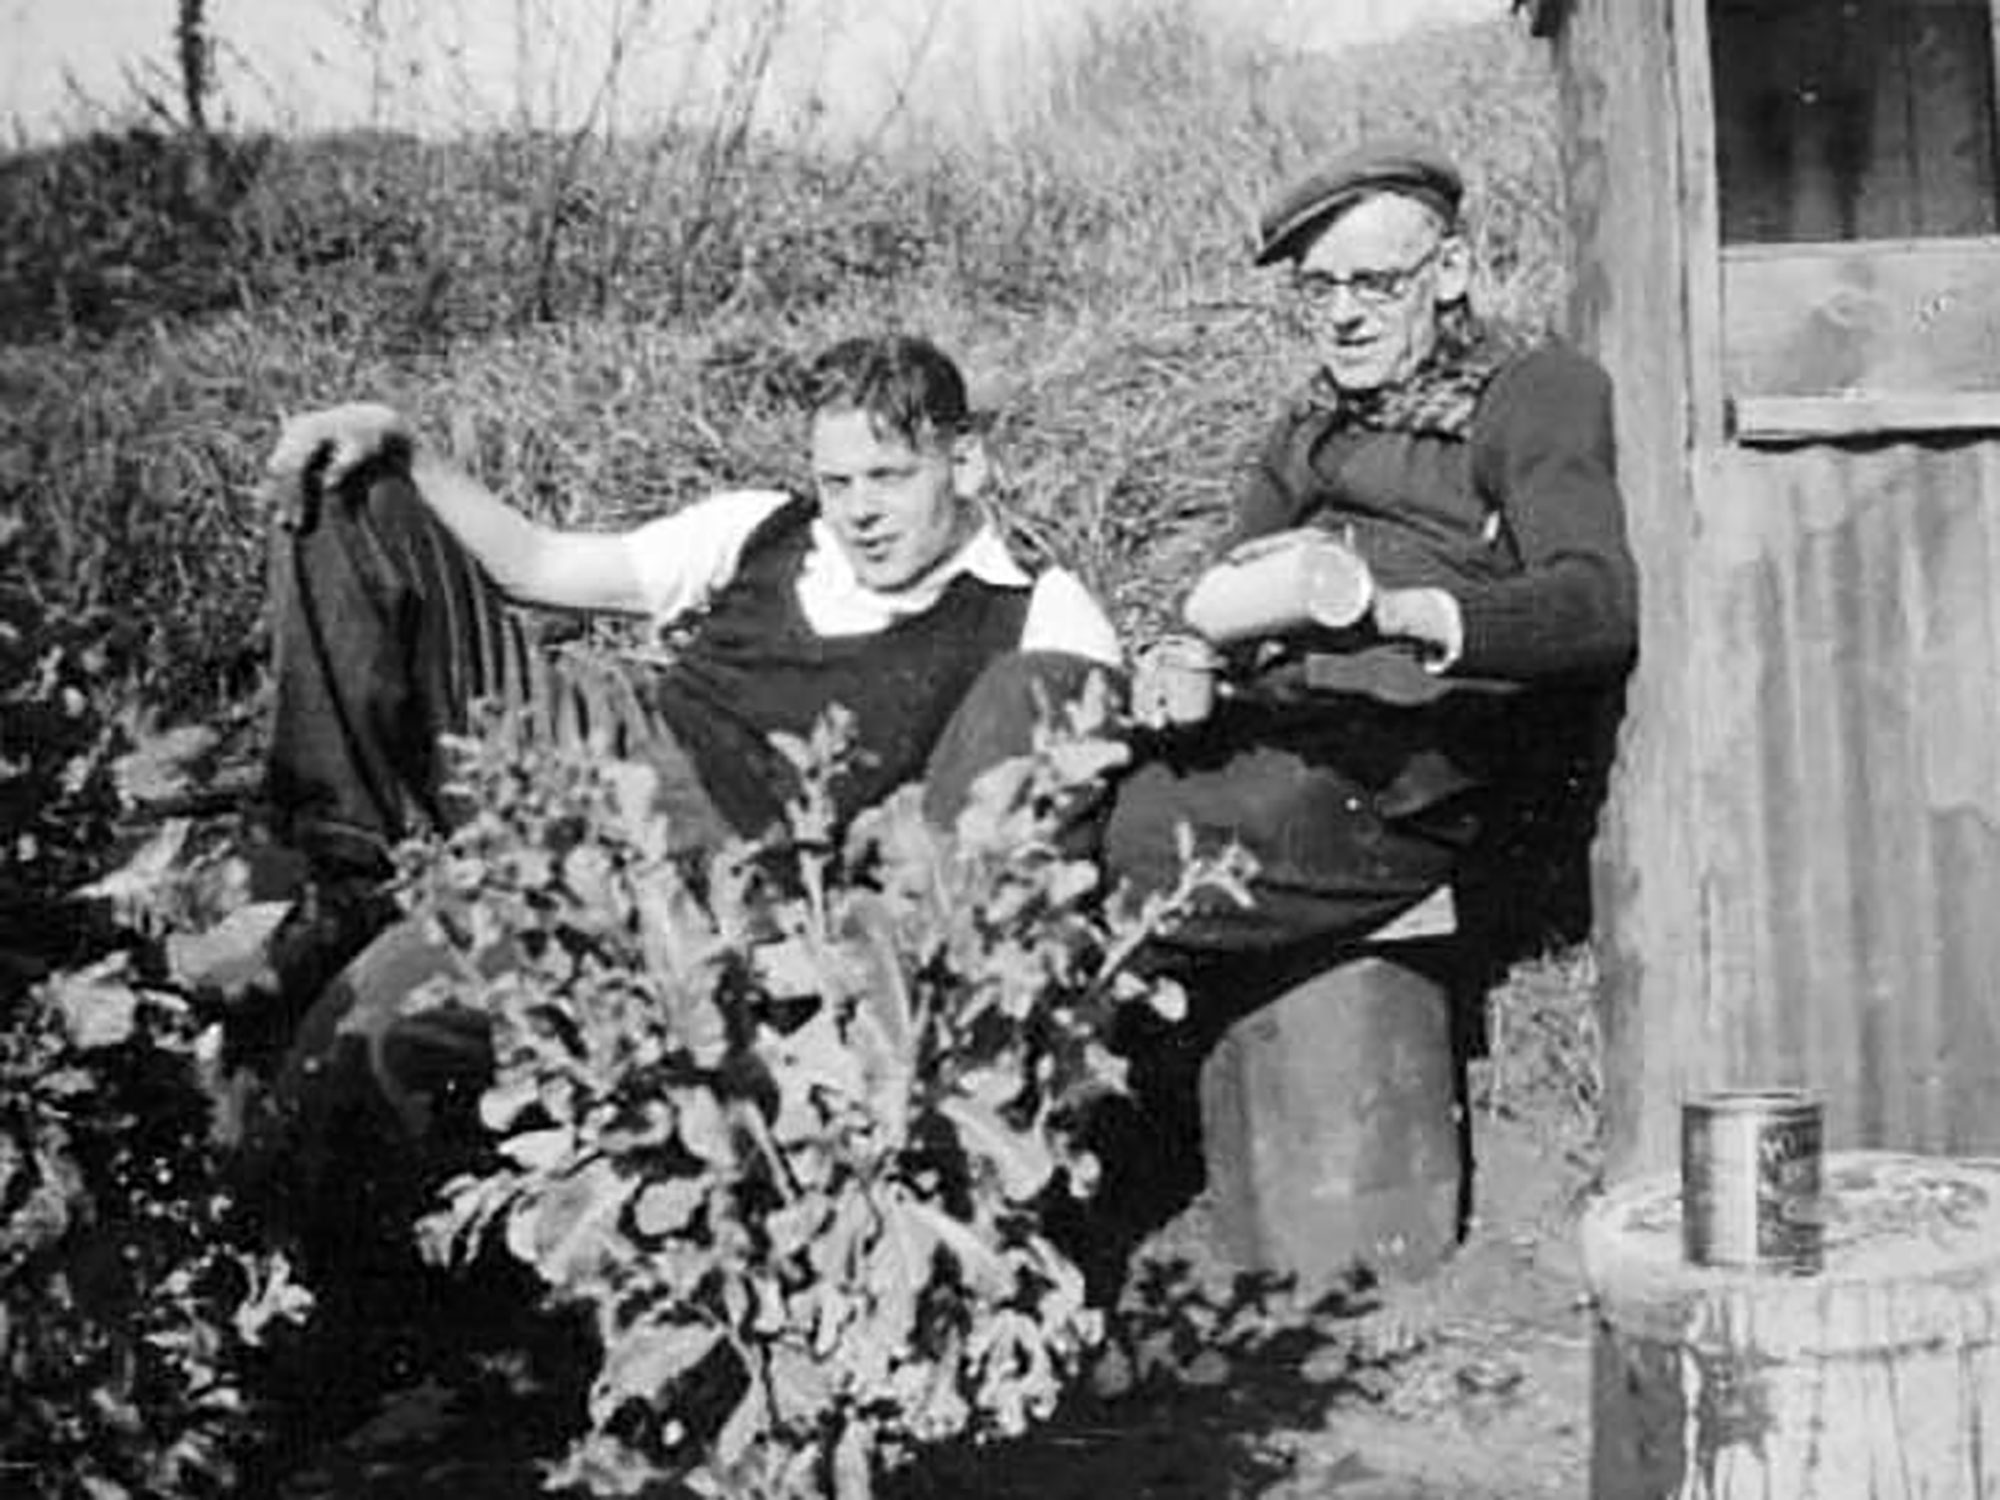 Frederick and Harry at their allotment